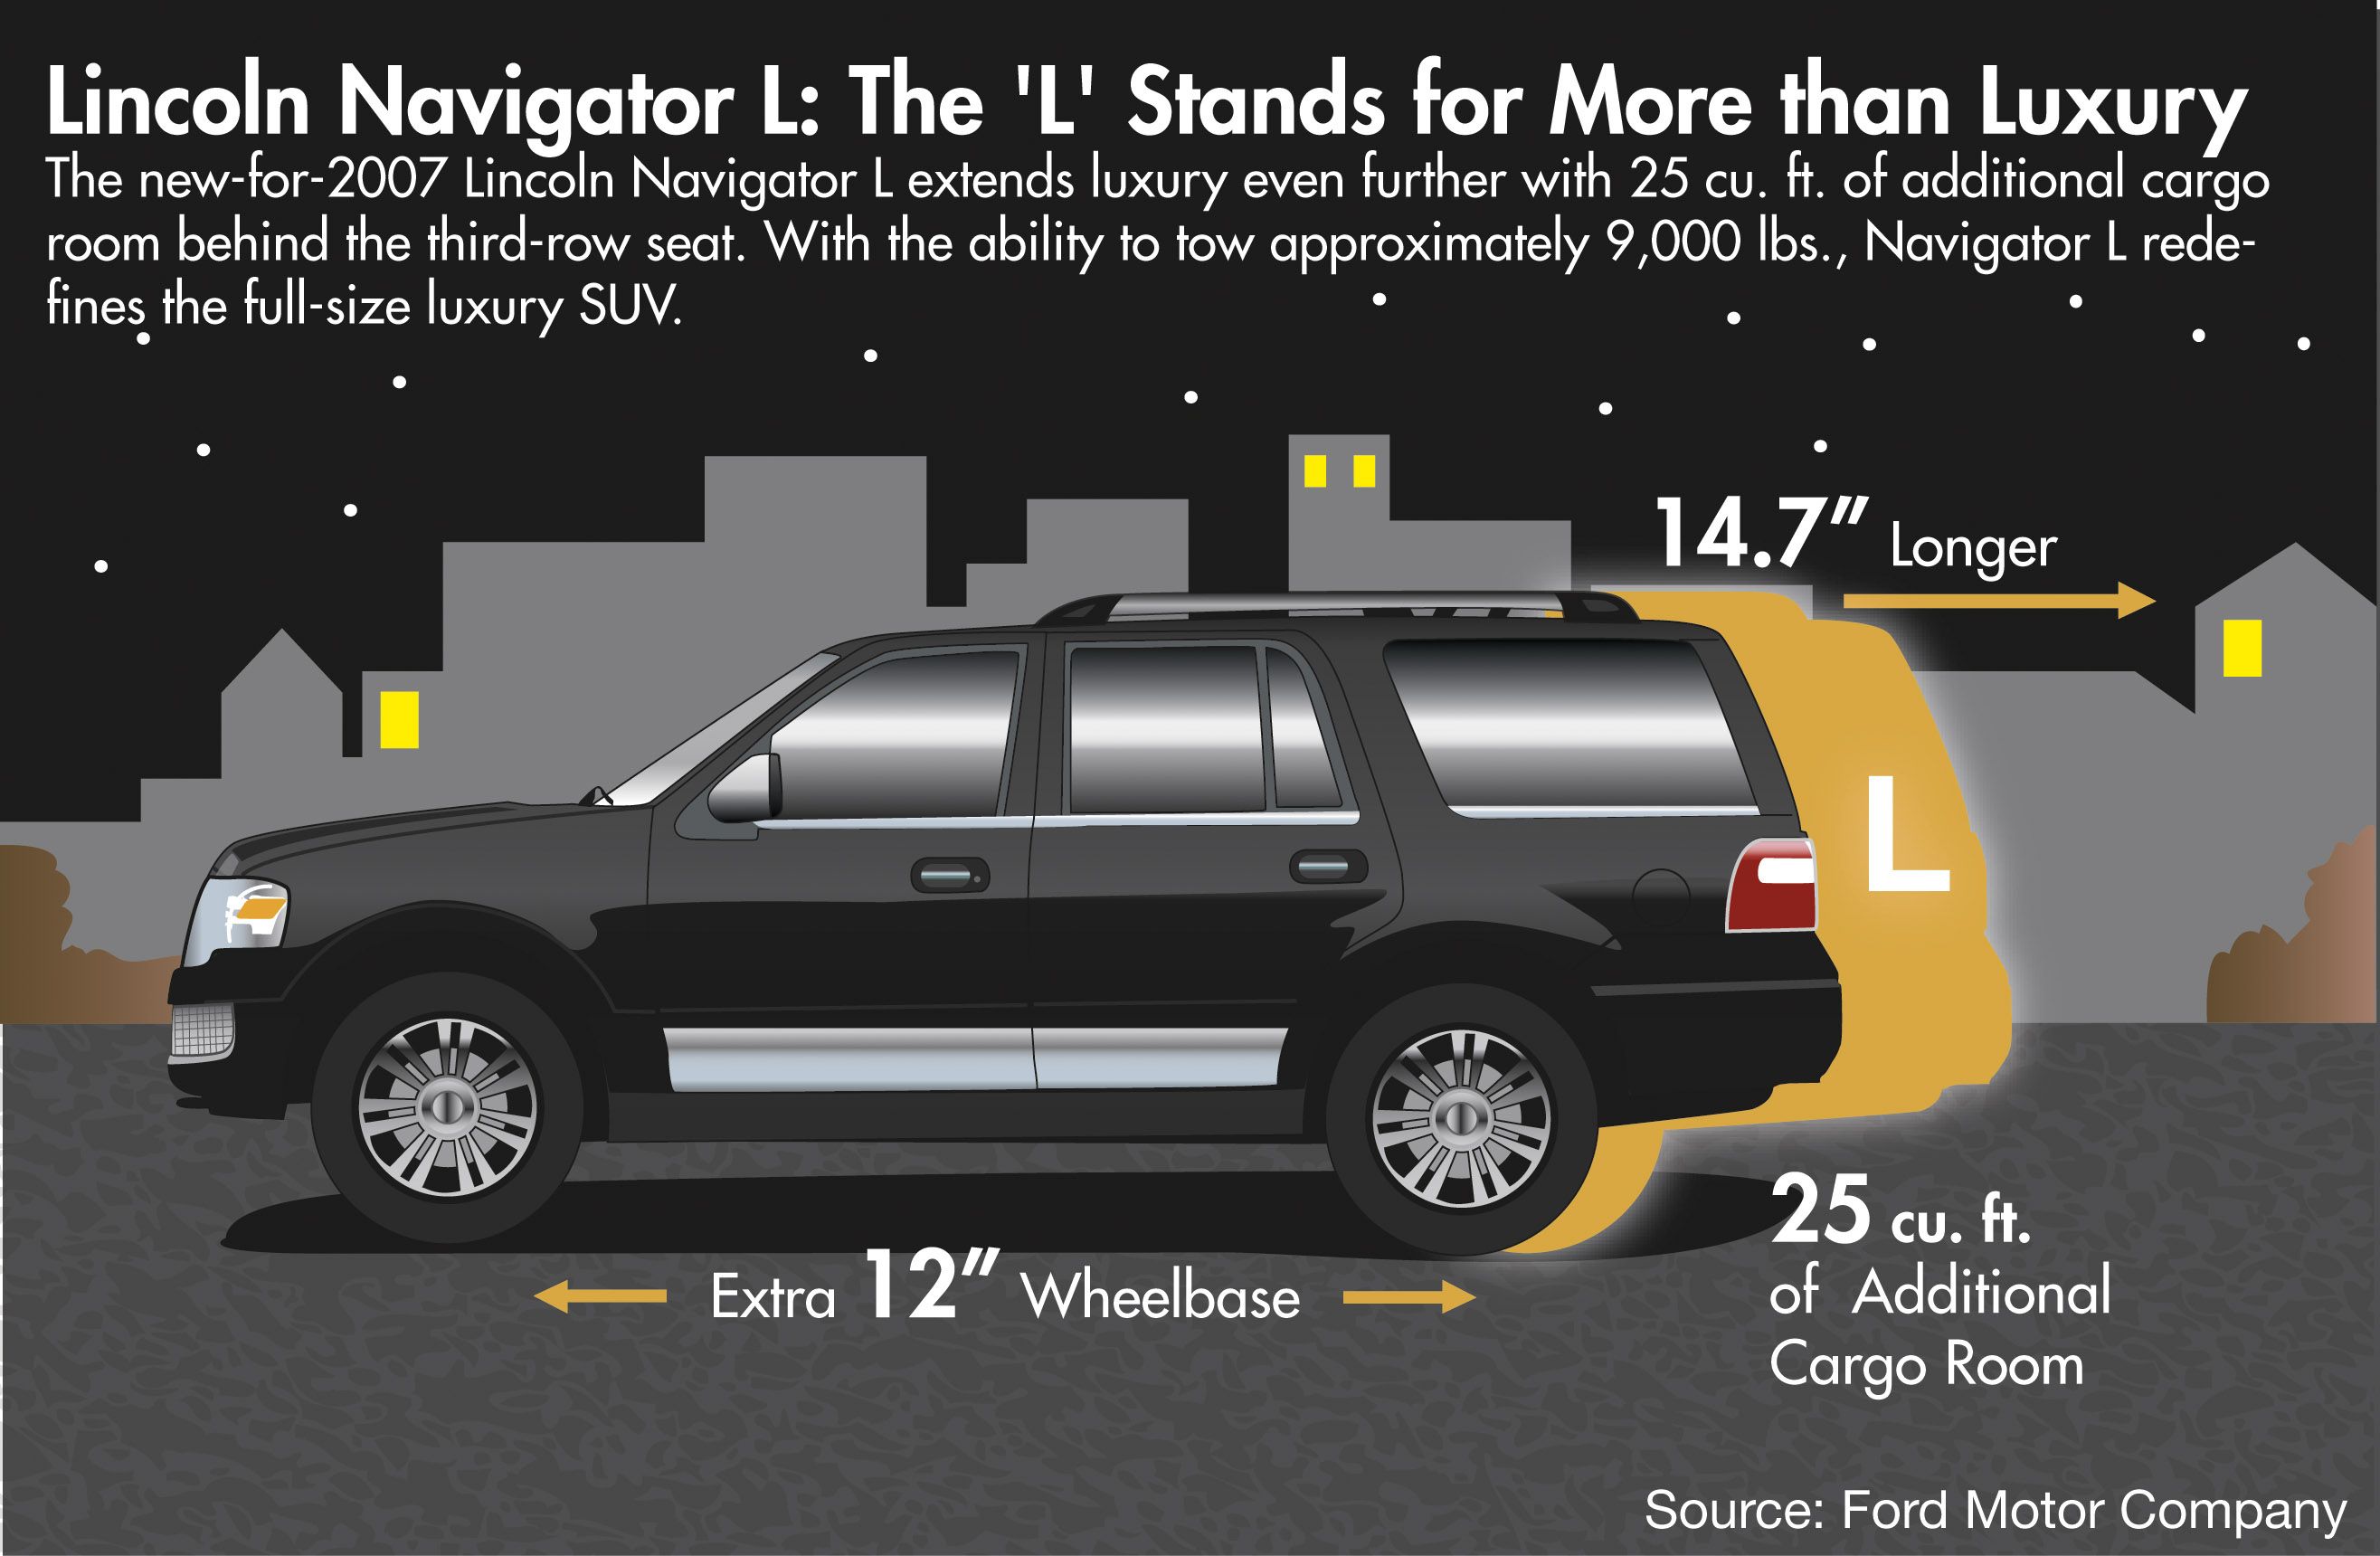 The Lincoln Navigator L extends luxury even further with an additional 25 cu. ft. cargo room behind the third-row seat.